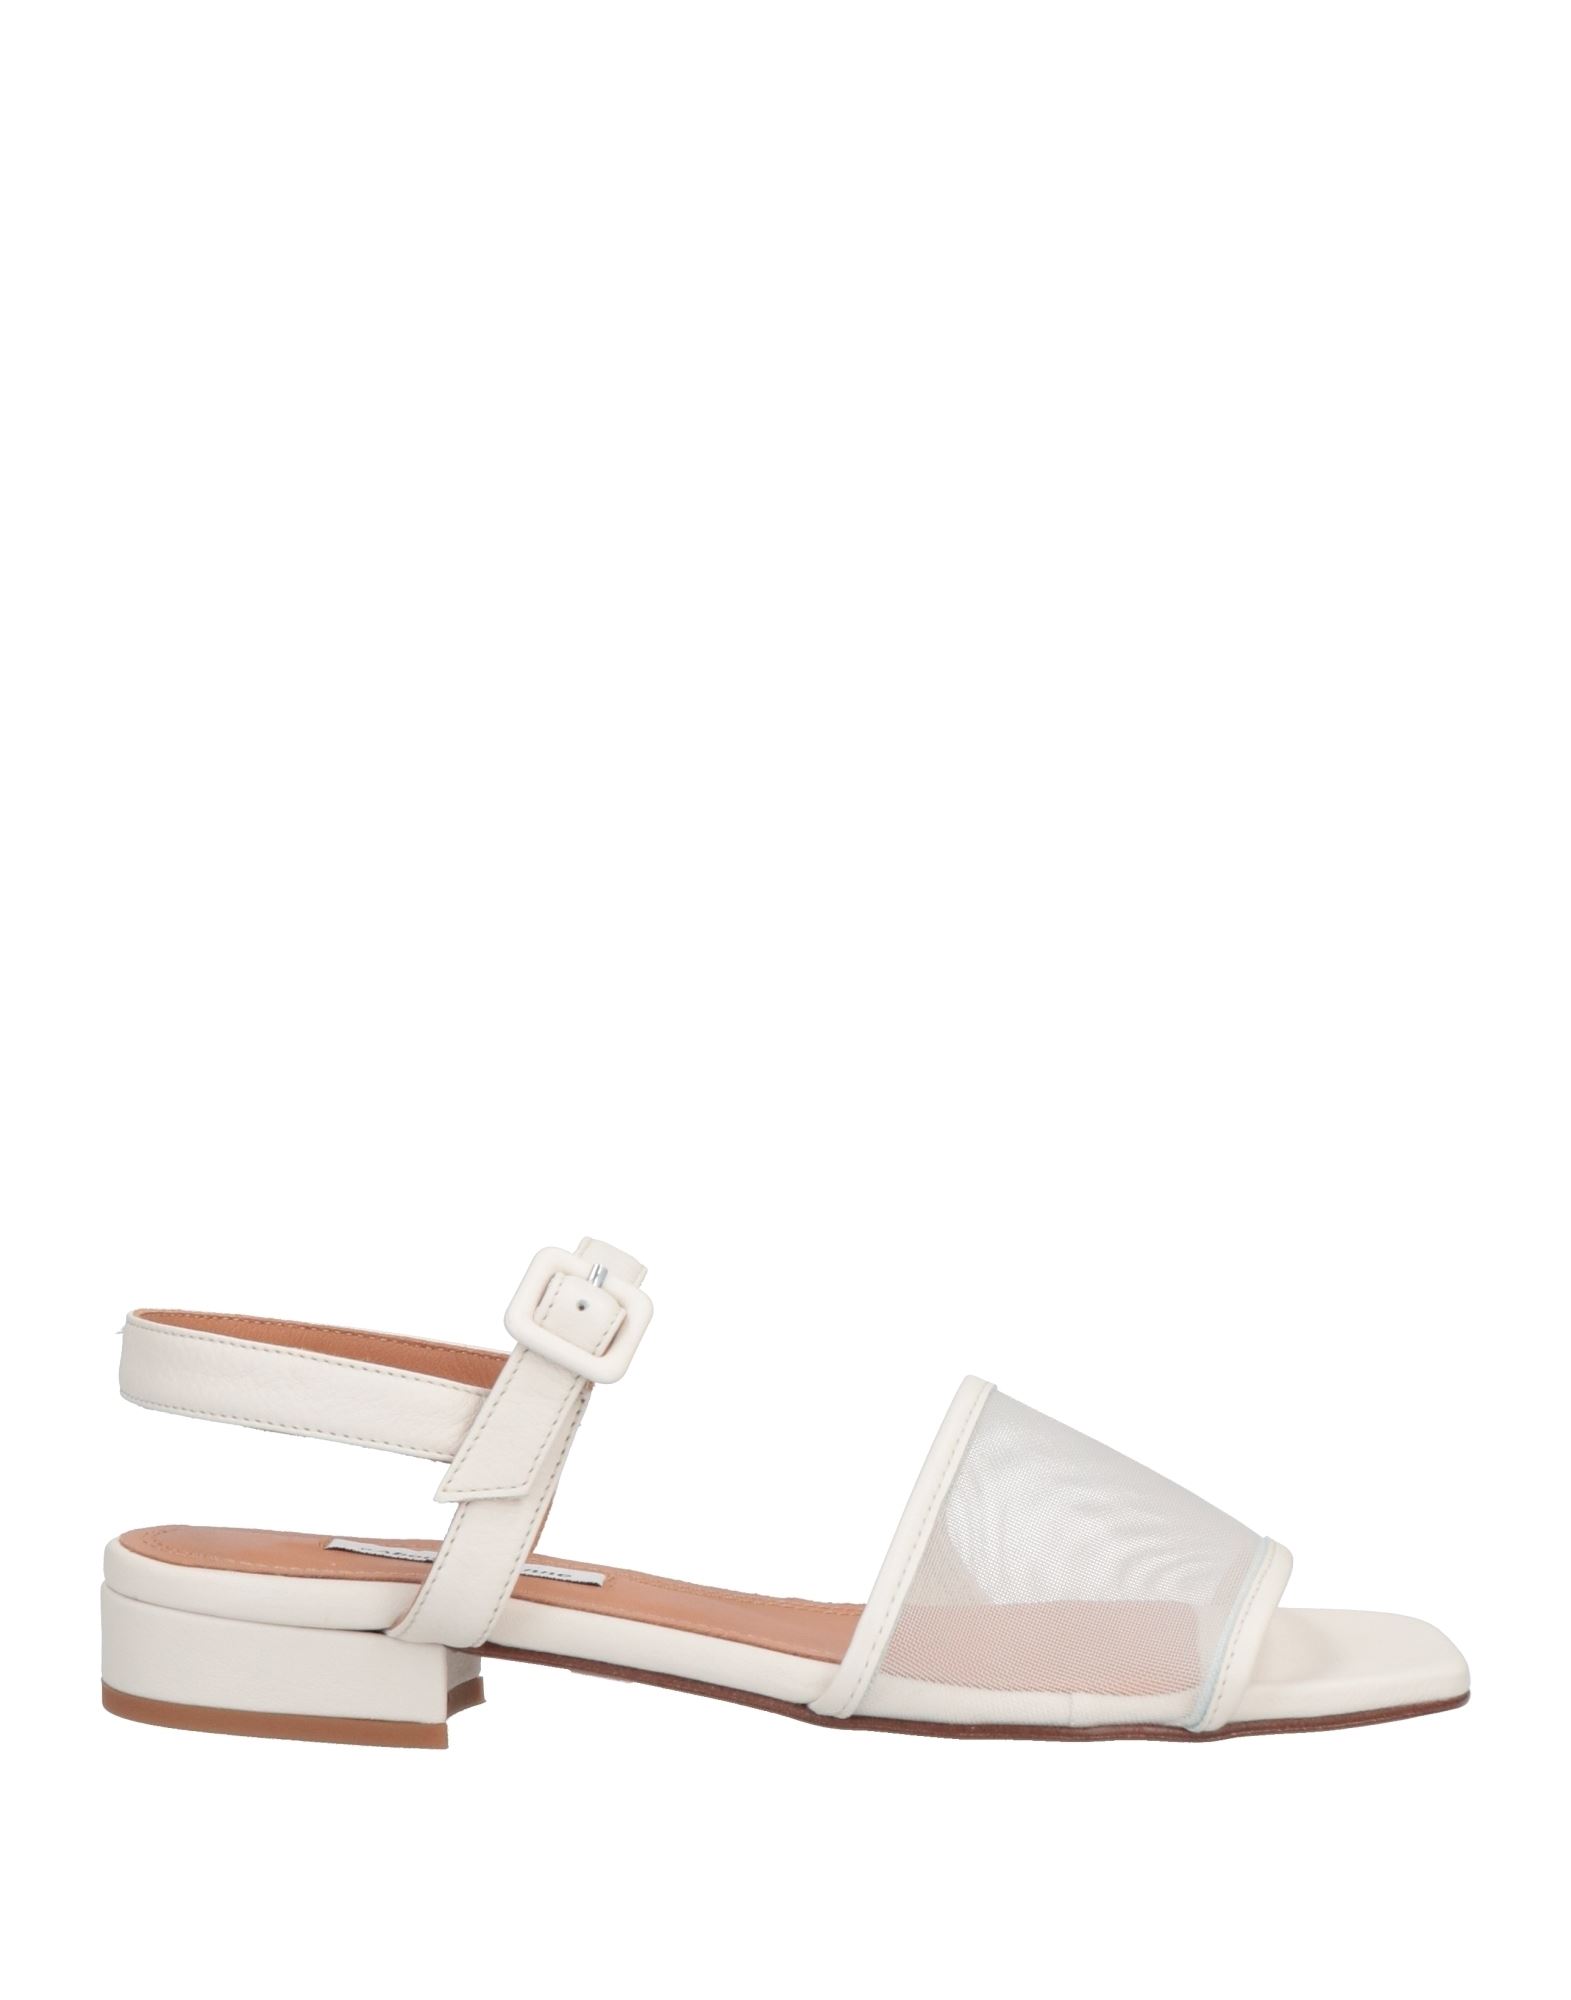 About Arianne Sandals In White